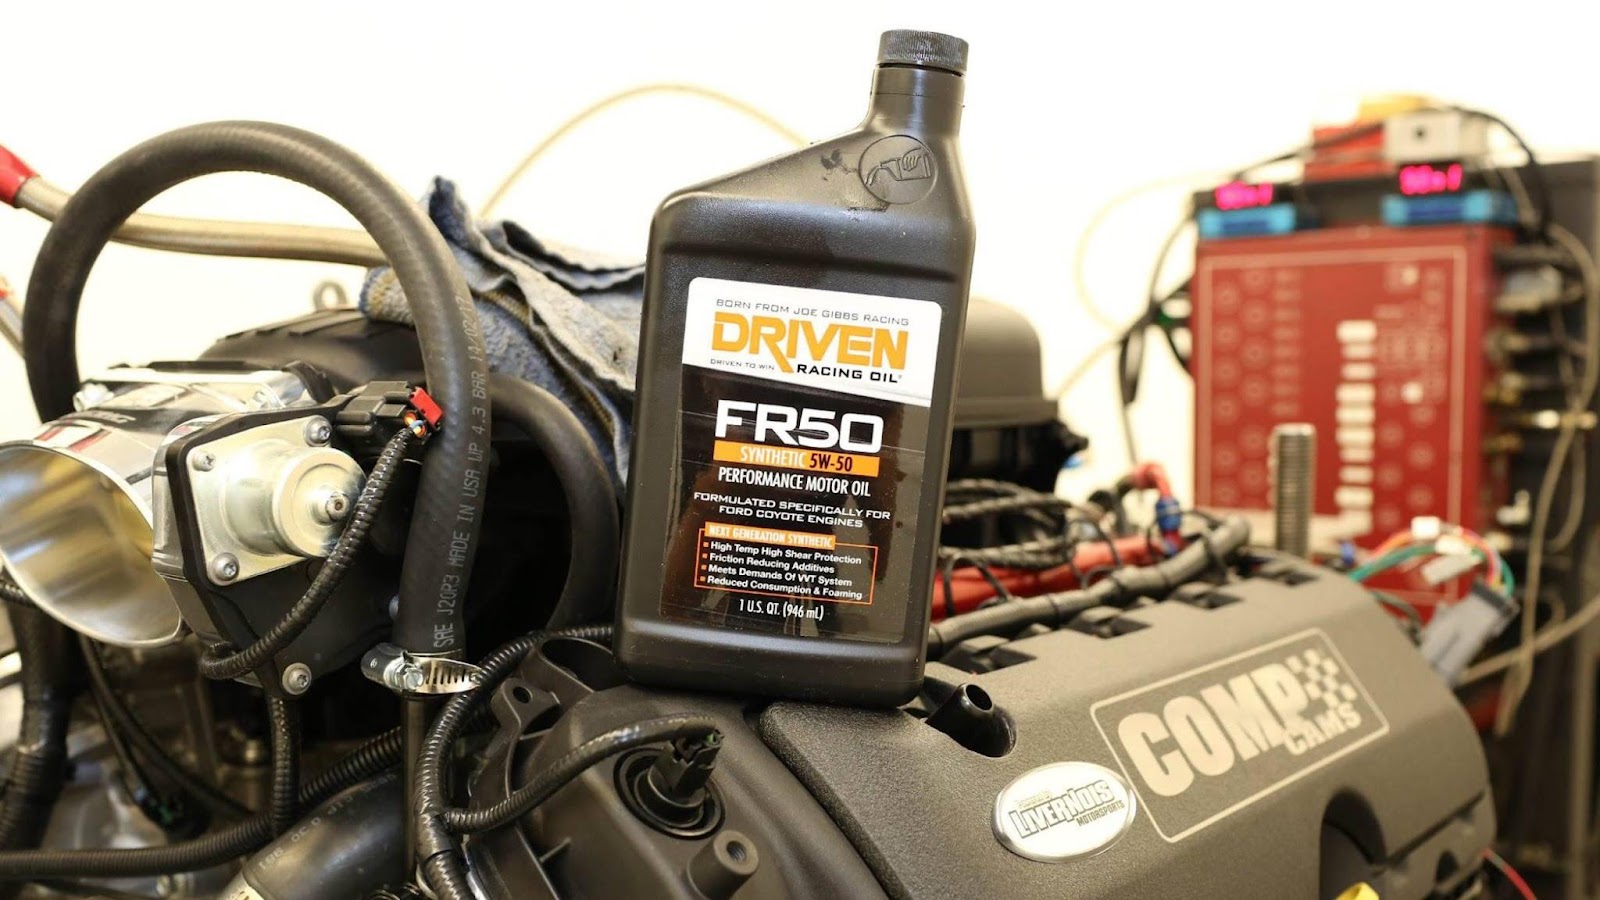 What You Need to Consider Before Tuning Your Engine